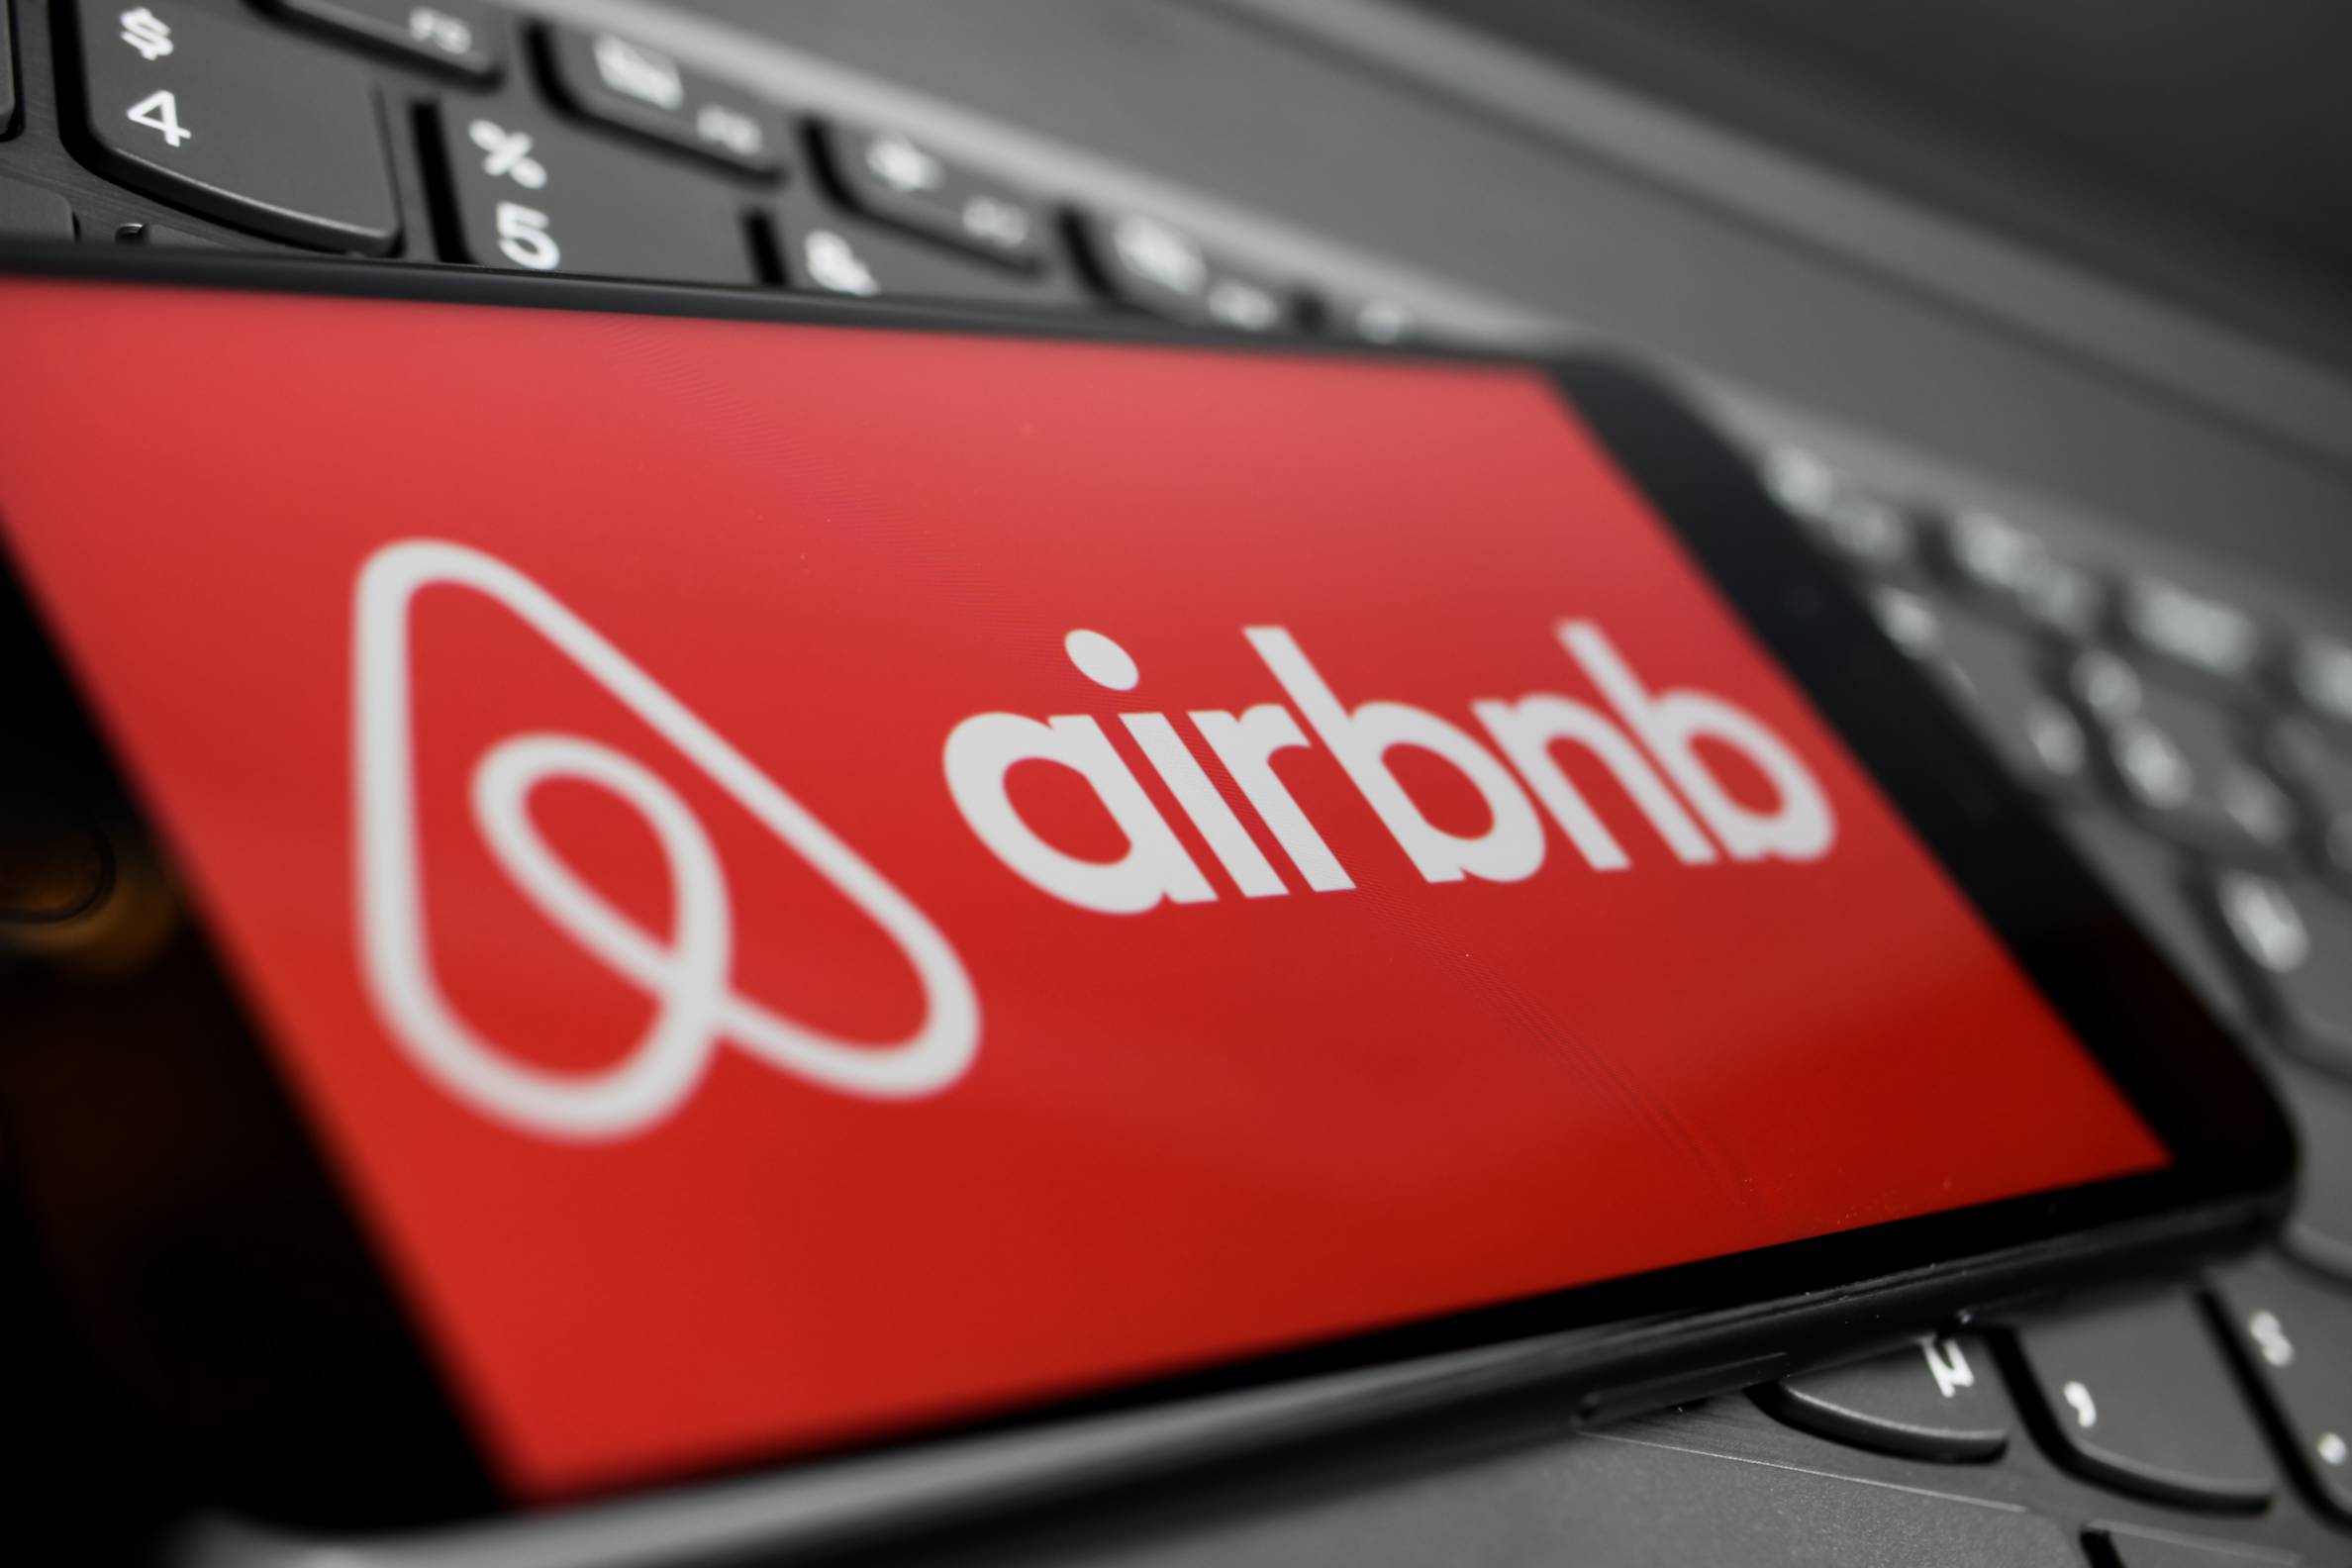 logo for airbnb on a cellphone that is resting on a keyboard